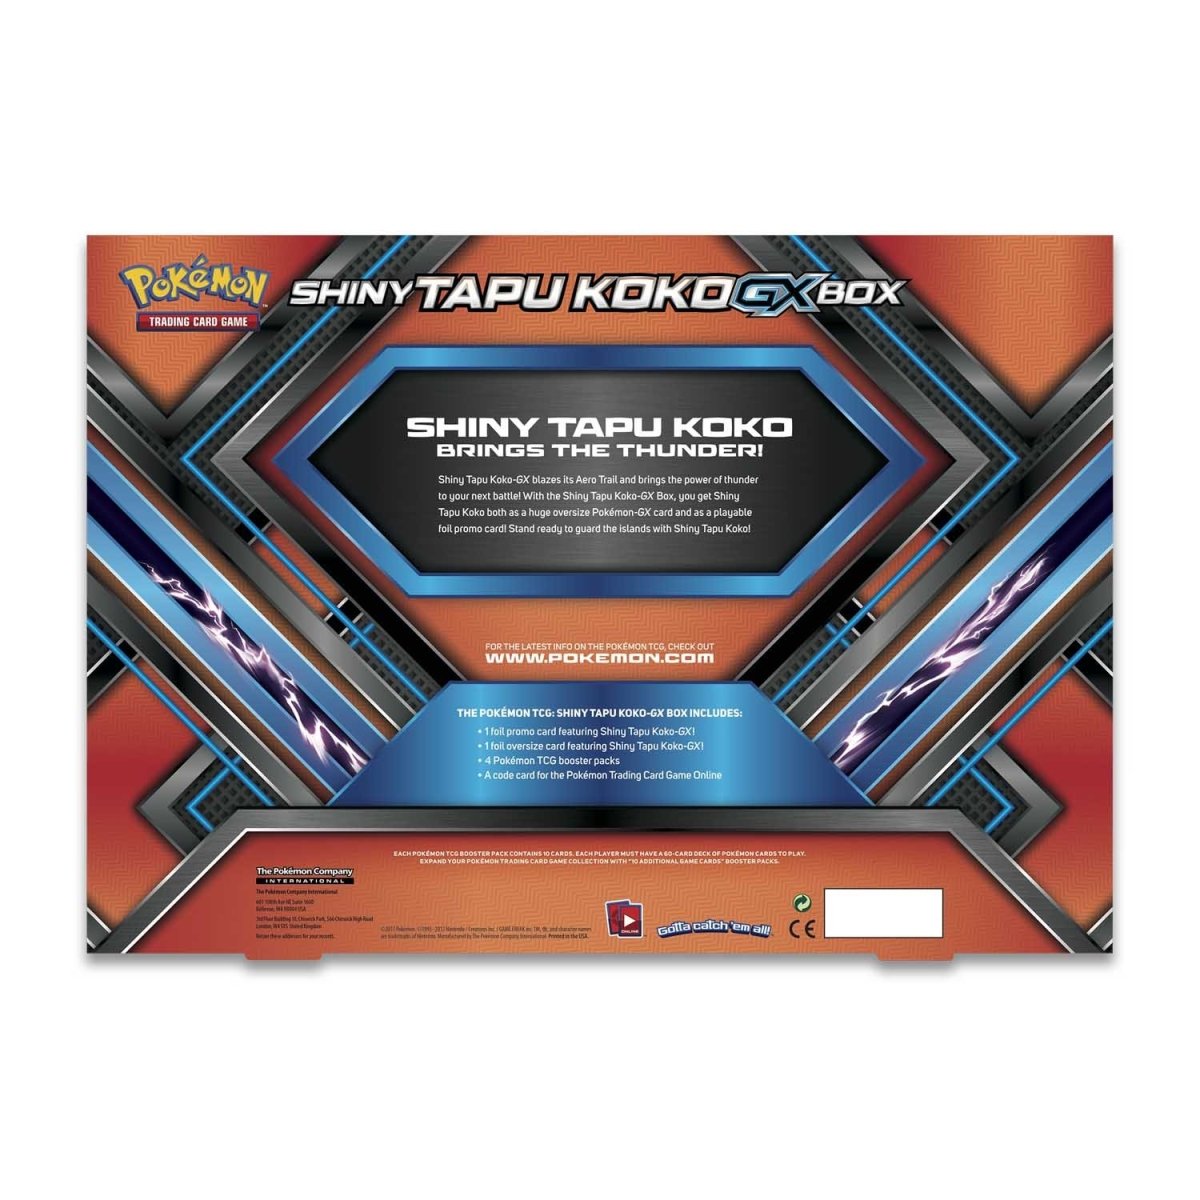 Pokemon Cards - SHINY TAPU KOKO GX BOX (1 Foil, 1 Oversize Foil, 4 Packs)  (New): : Sell TY Beanie Babies, Action Figures,  Barbies, Cards & Toys selling online